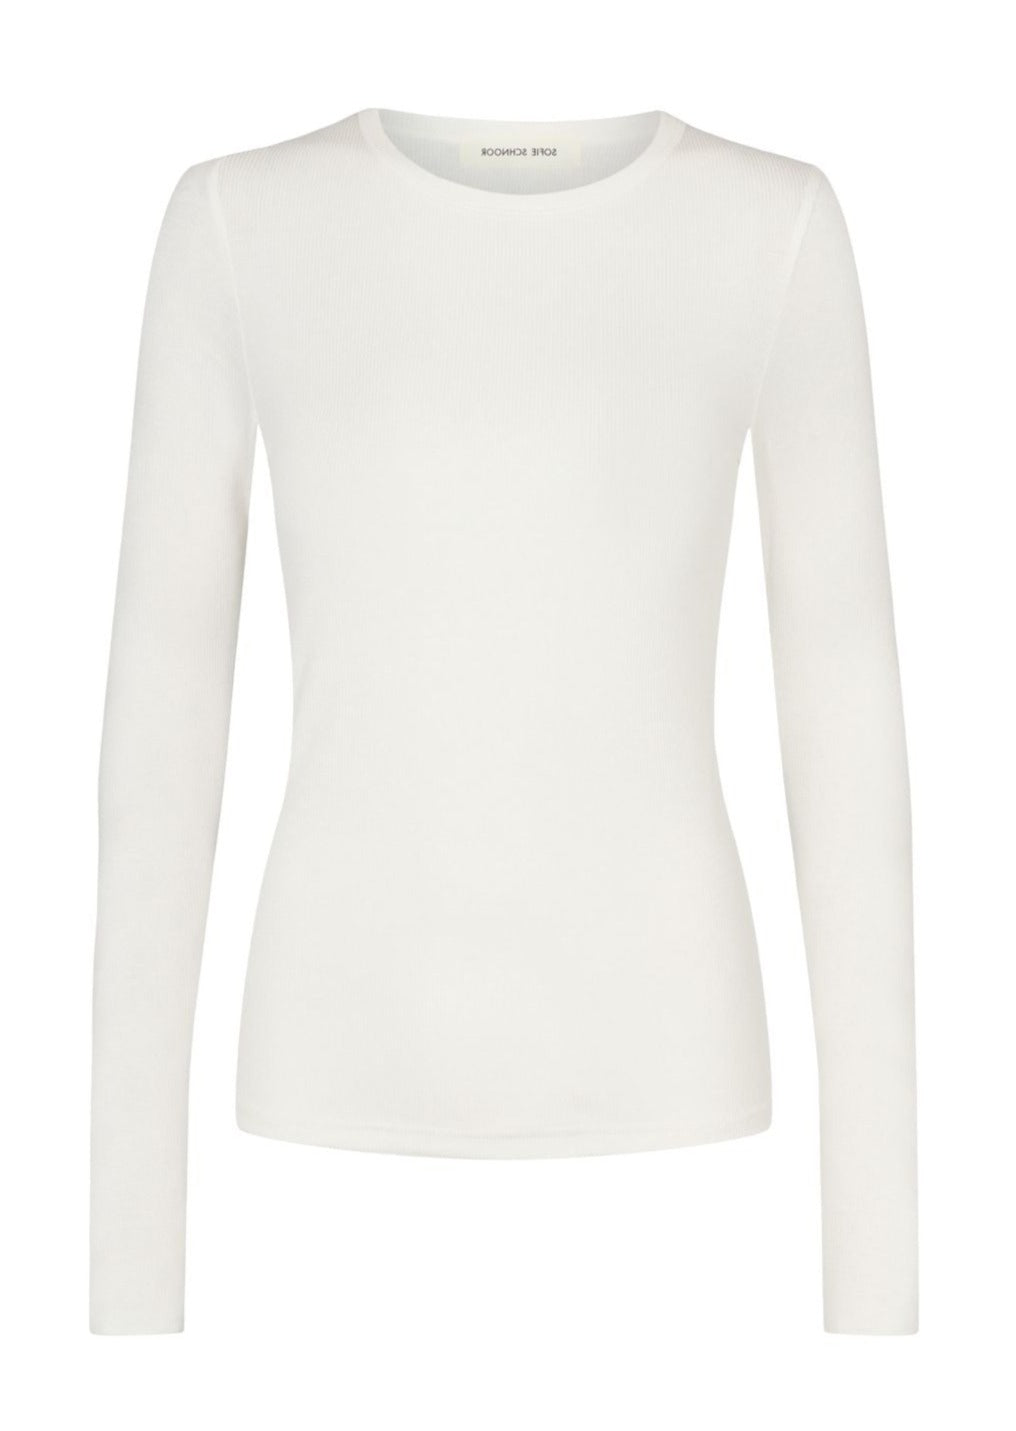 Sofie Schnoor Patricia T-shirt Long Sleeve White